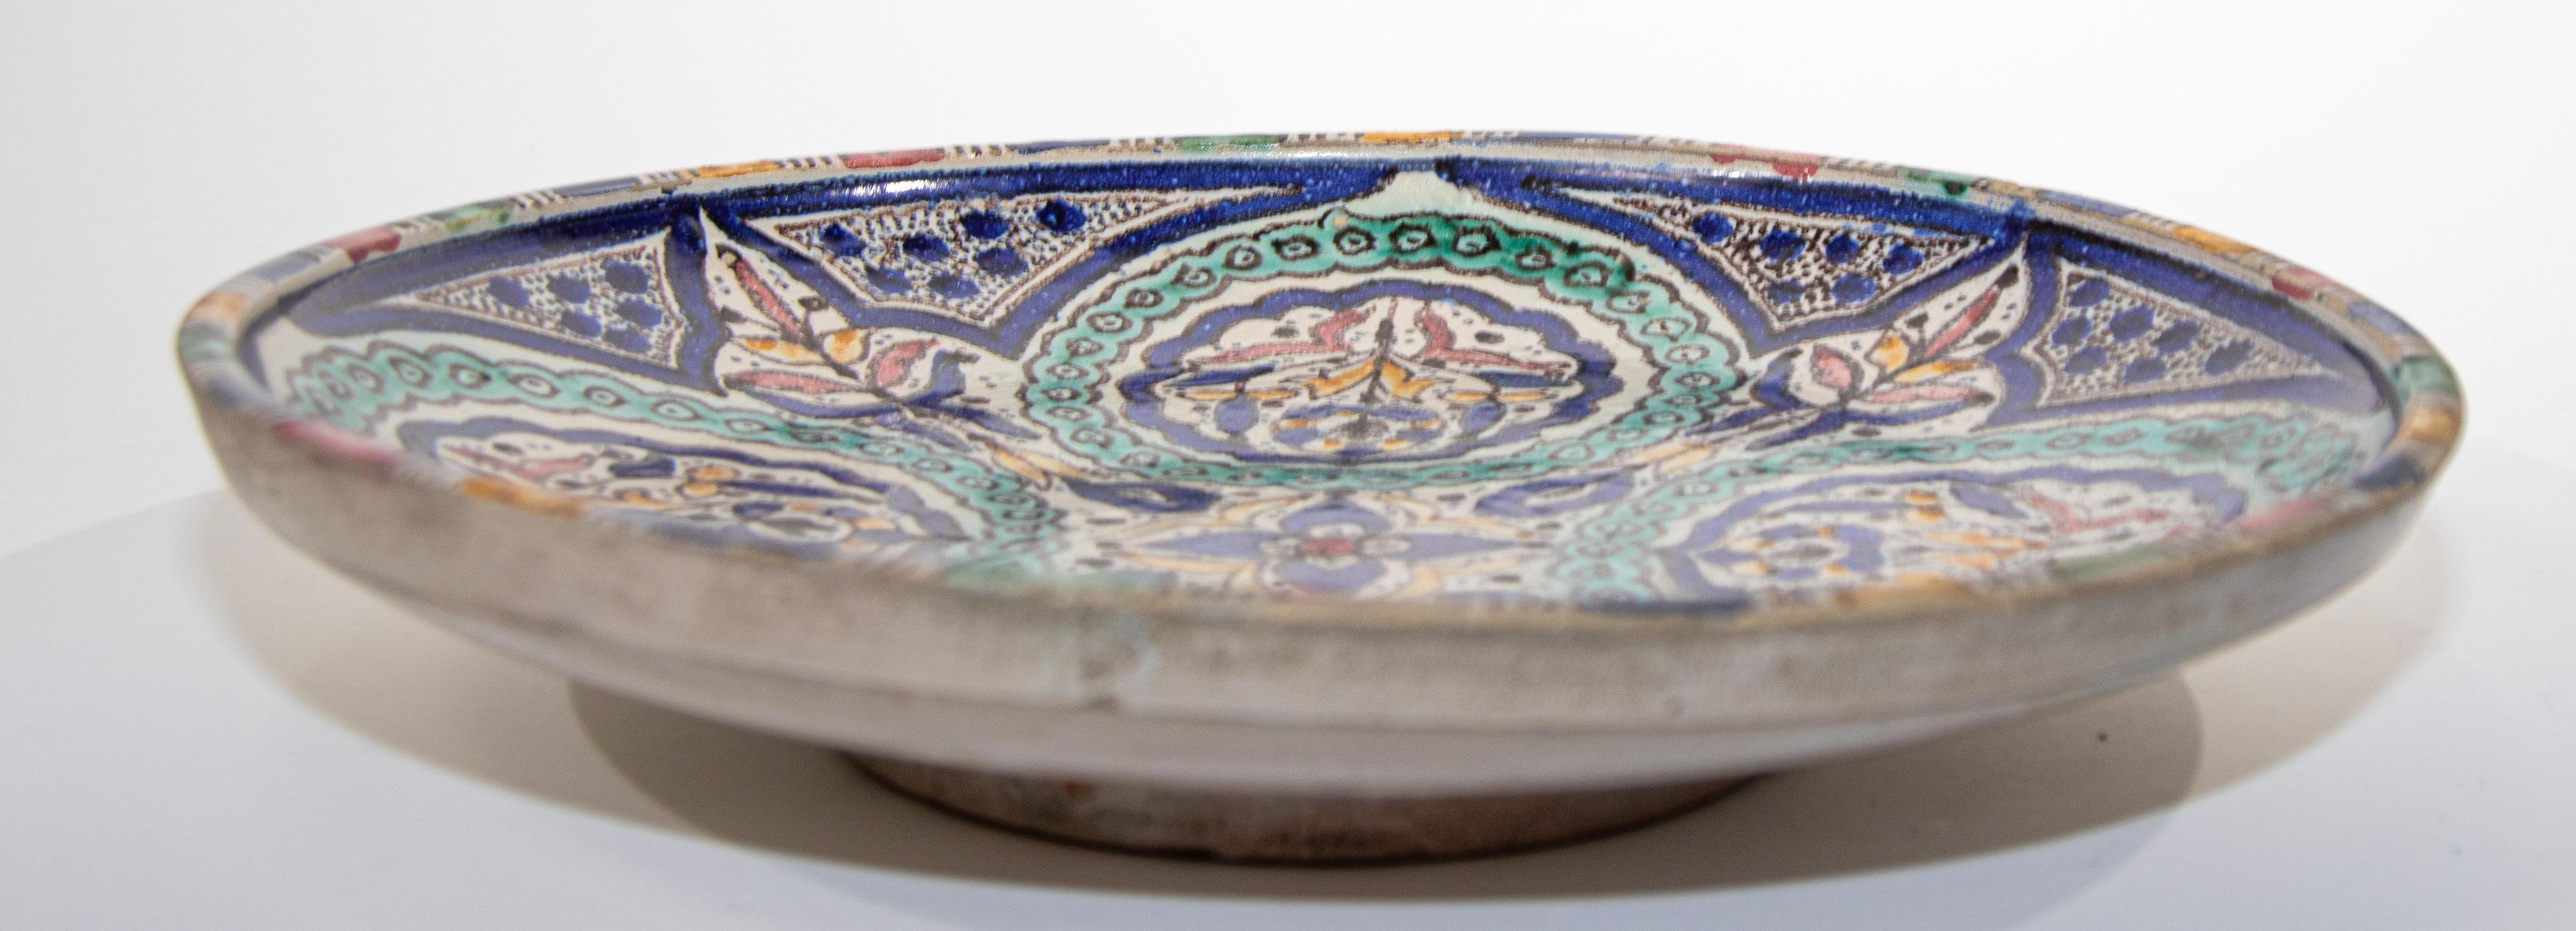 Early 20th Century Antique Moroccan Ceramic Bowl from Fez 1920's For Sale